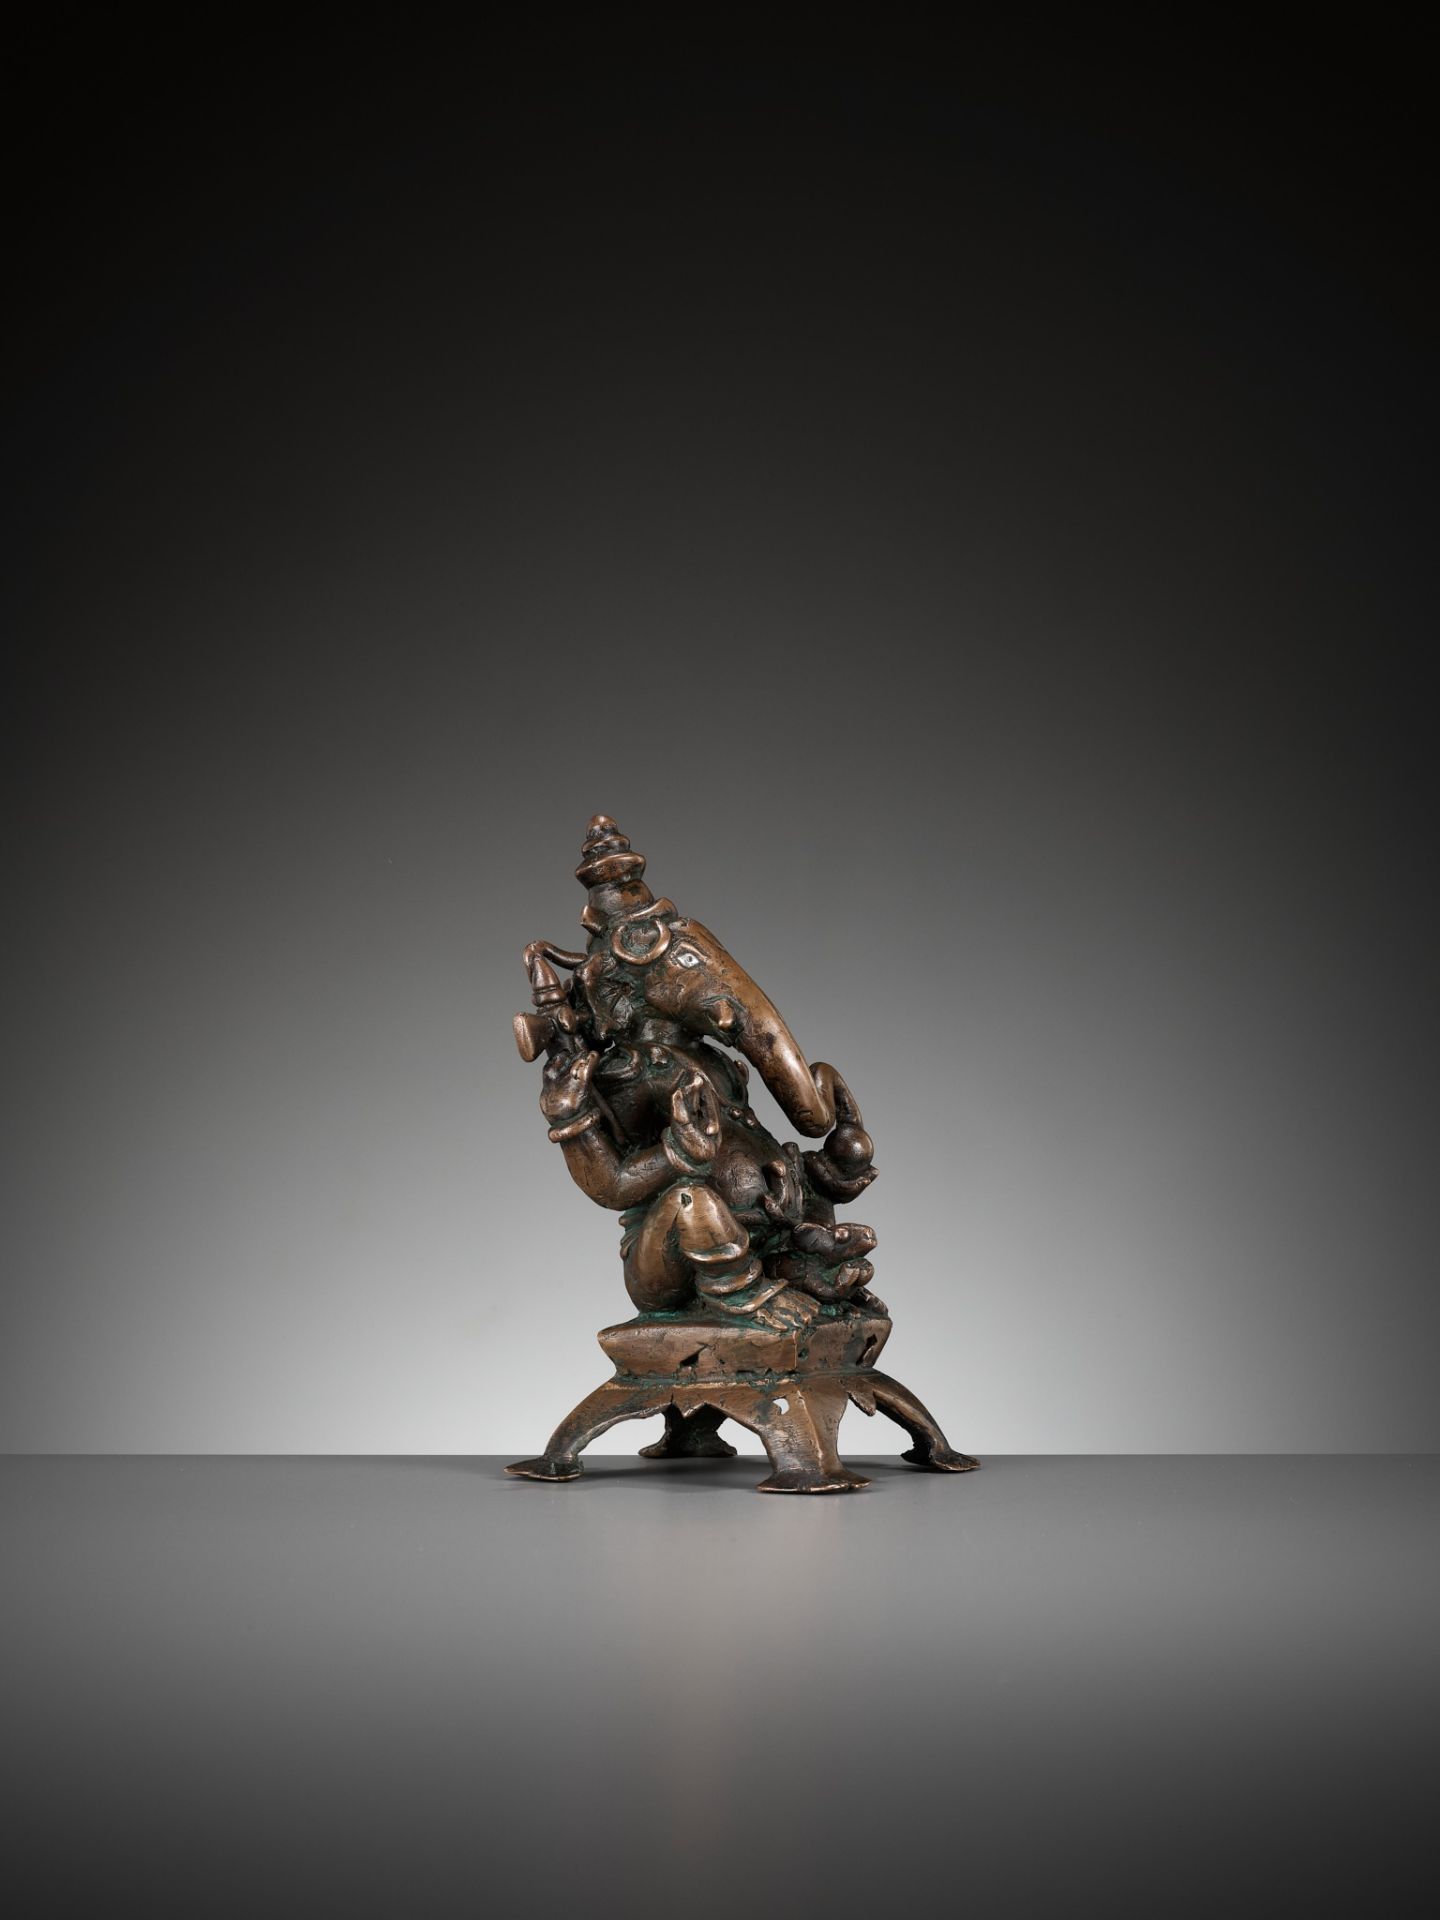 A SILVER-INLAID COPPER ALLOY FIGURE OF GANESHA, SOUTH INDIA, C. 1650-1750 - Image 9 of 12